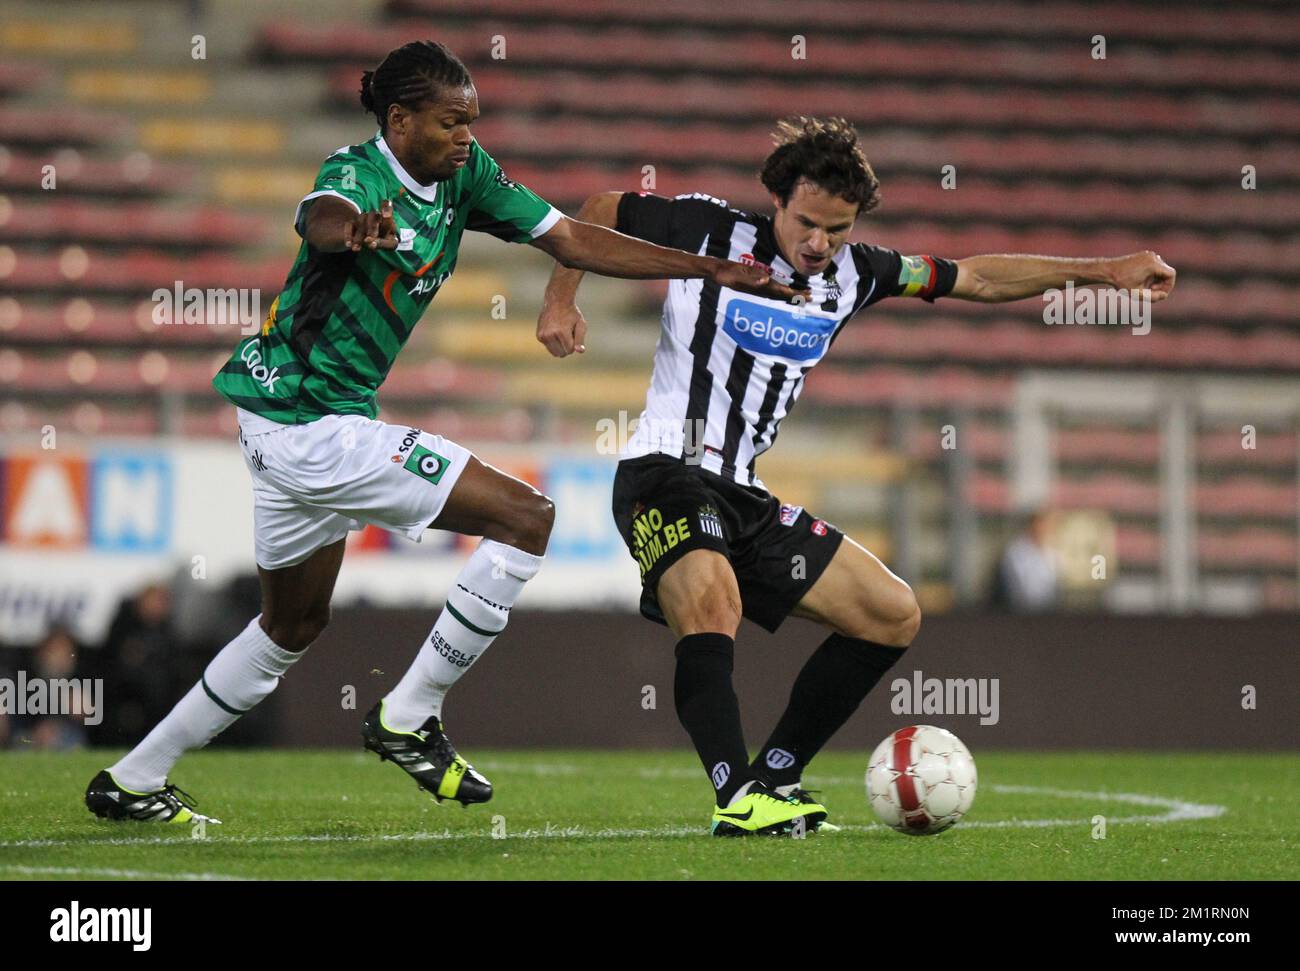 Cercle's Michael Uchebo and Charleroi's Ederson Tormena fight for the ball during the Jupiler Pro League match between Sporting Charleroi and Cercle Brugge KSV, in Charleroi, Saturday 21 September 2013, on day 8 of the Belgian soccer championship. BELGA PHOTO VIRGINIE LEFOUR Stock Photo